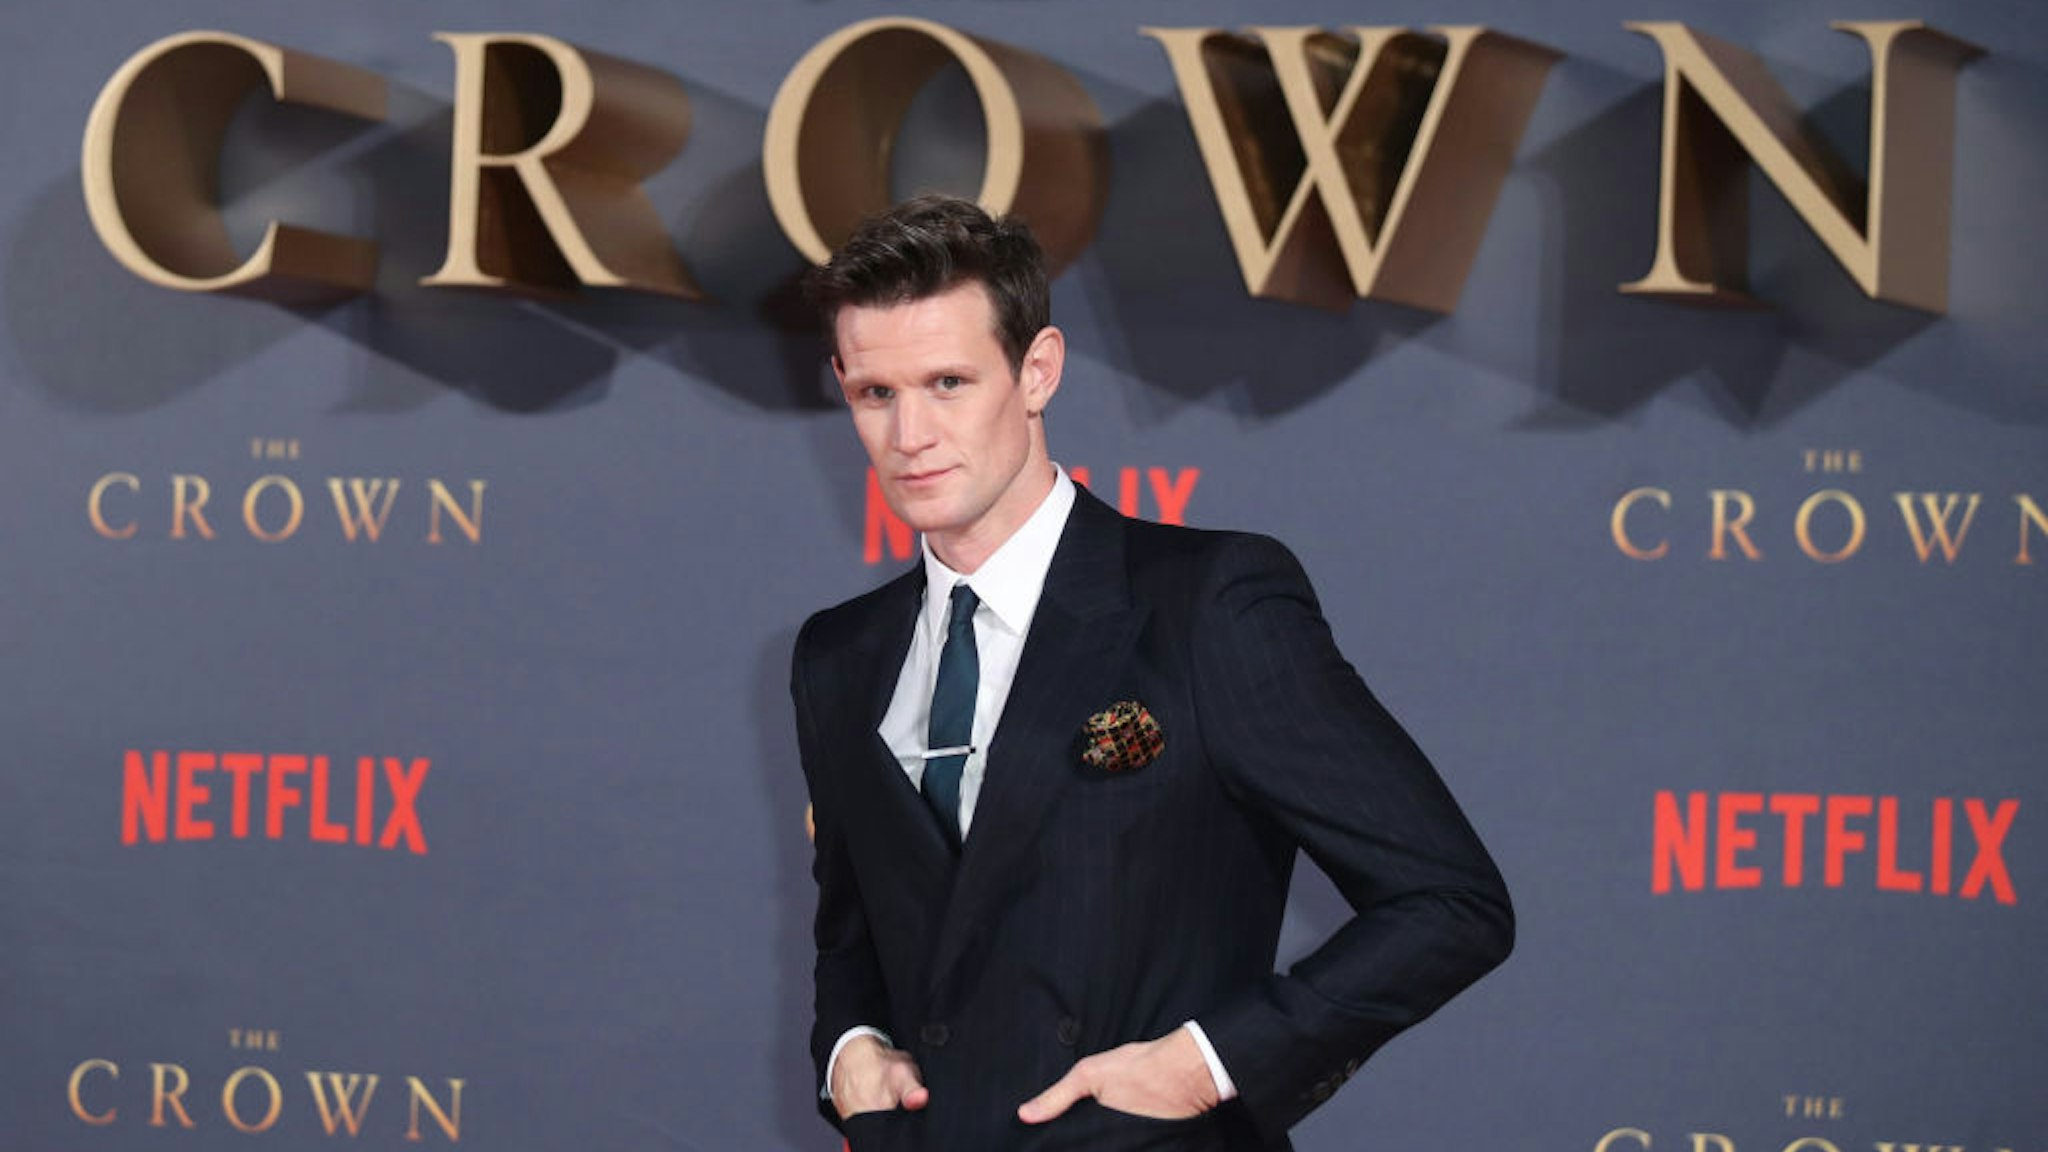 LONDON, ENGLAND - NOVEMBER 21: Matt Smith attends the World Premiere of season 2 of Netflix "The Crown" at Odeon Leicester Square on November 21, 2017 in London, England. (Photo by Mike Marsland/WireImage)